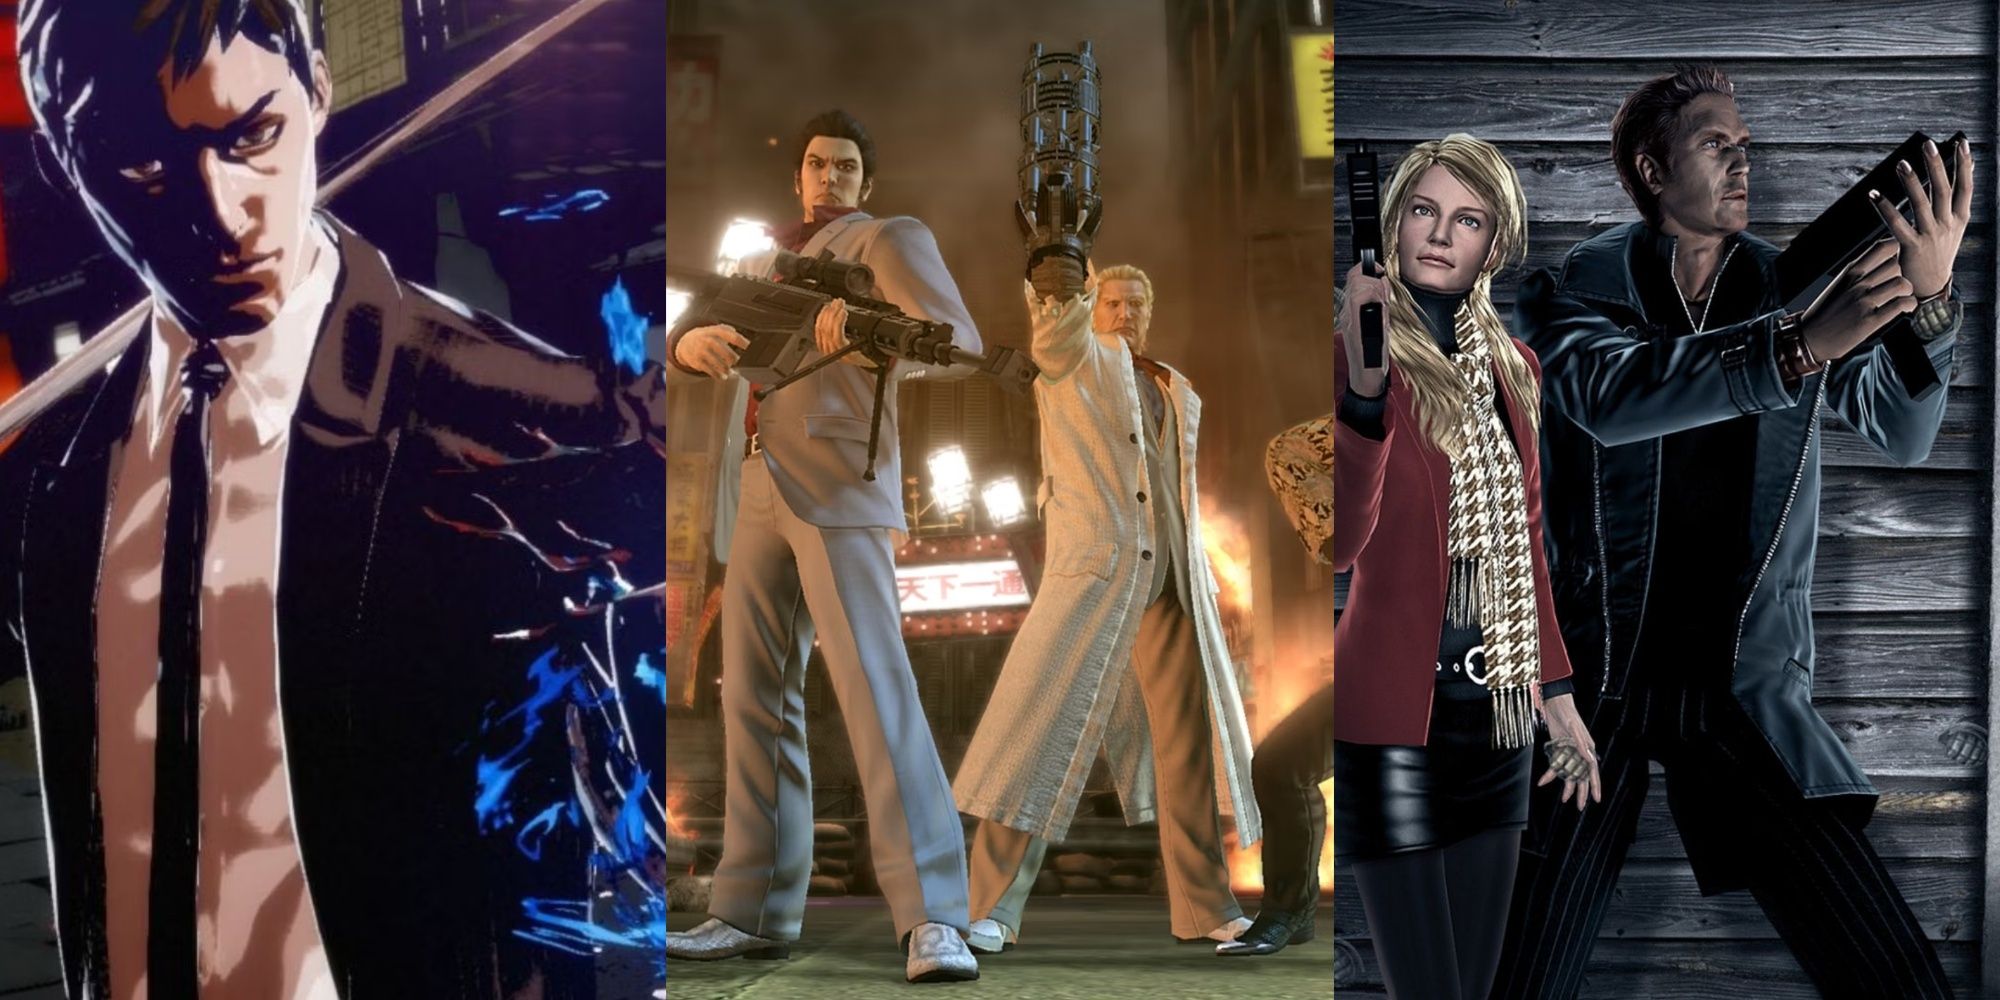 Mondo from Killer is Dead, Kiryu and Goda from Yakuza Dead Souls, and Kate and James from a grenade contest image of House of the Dead 4.